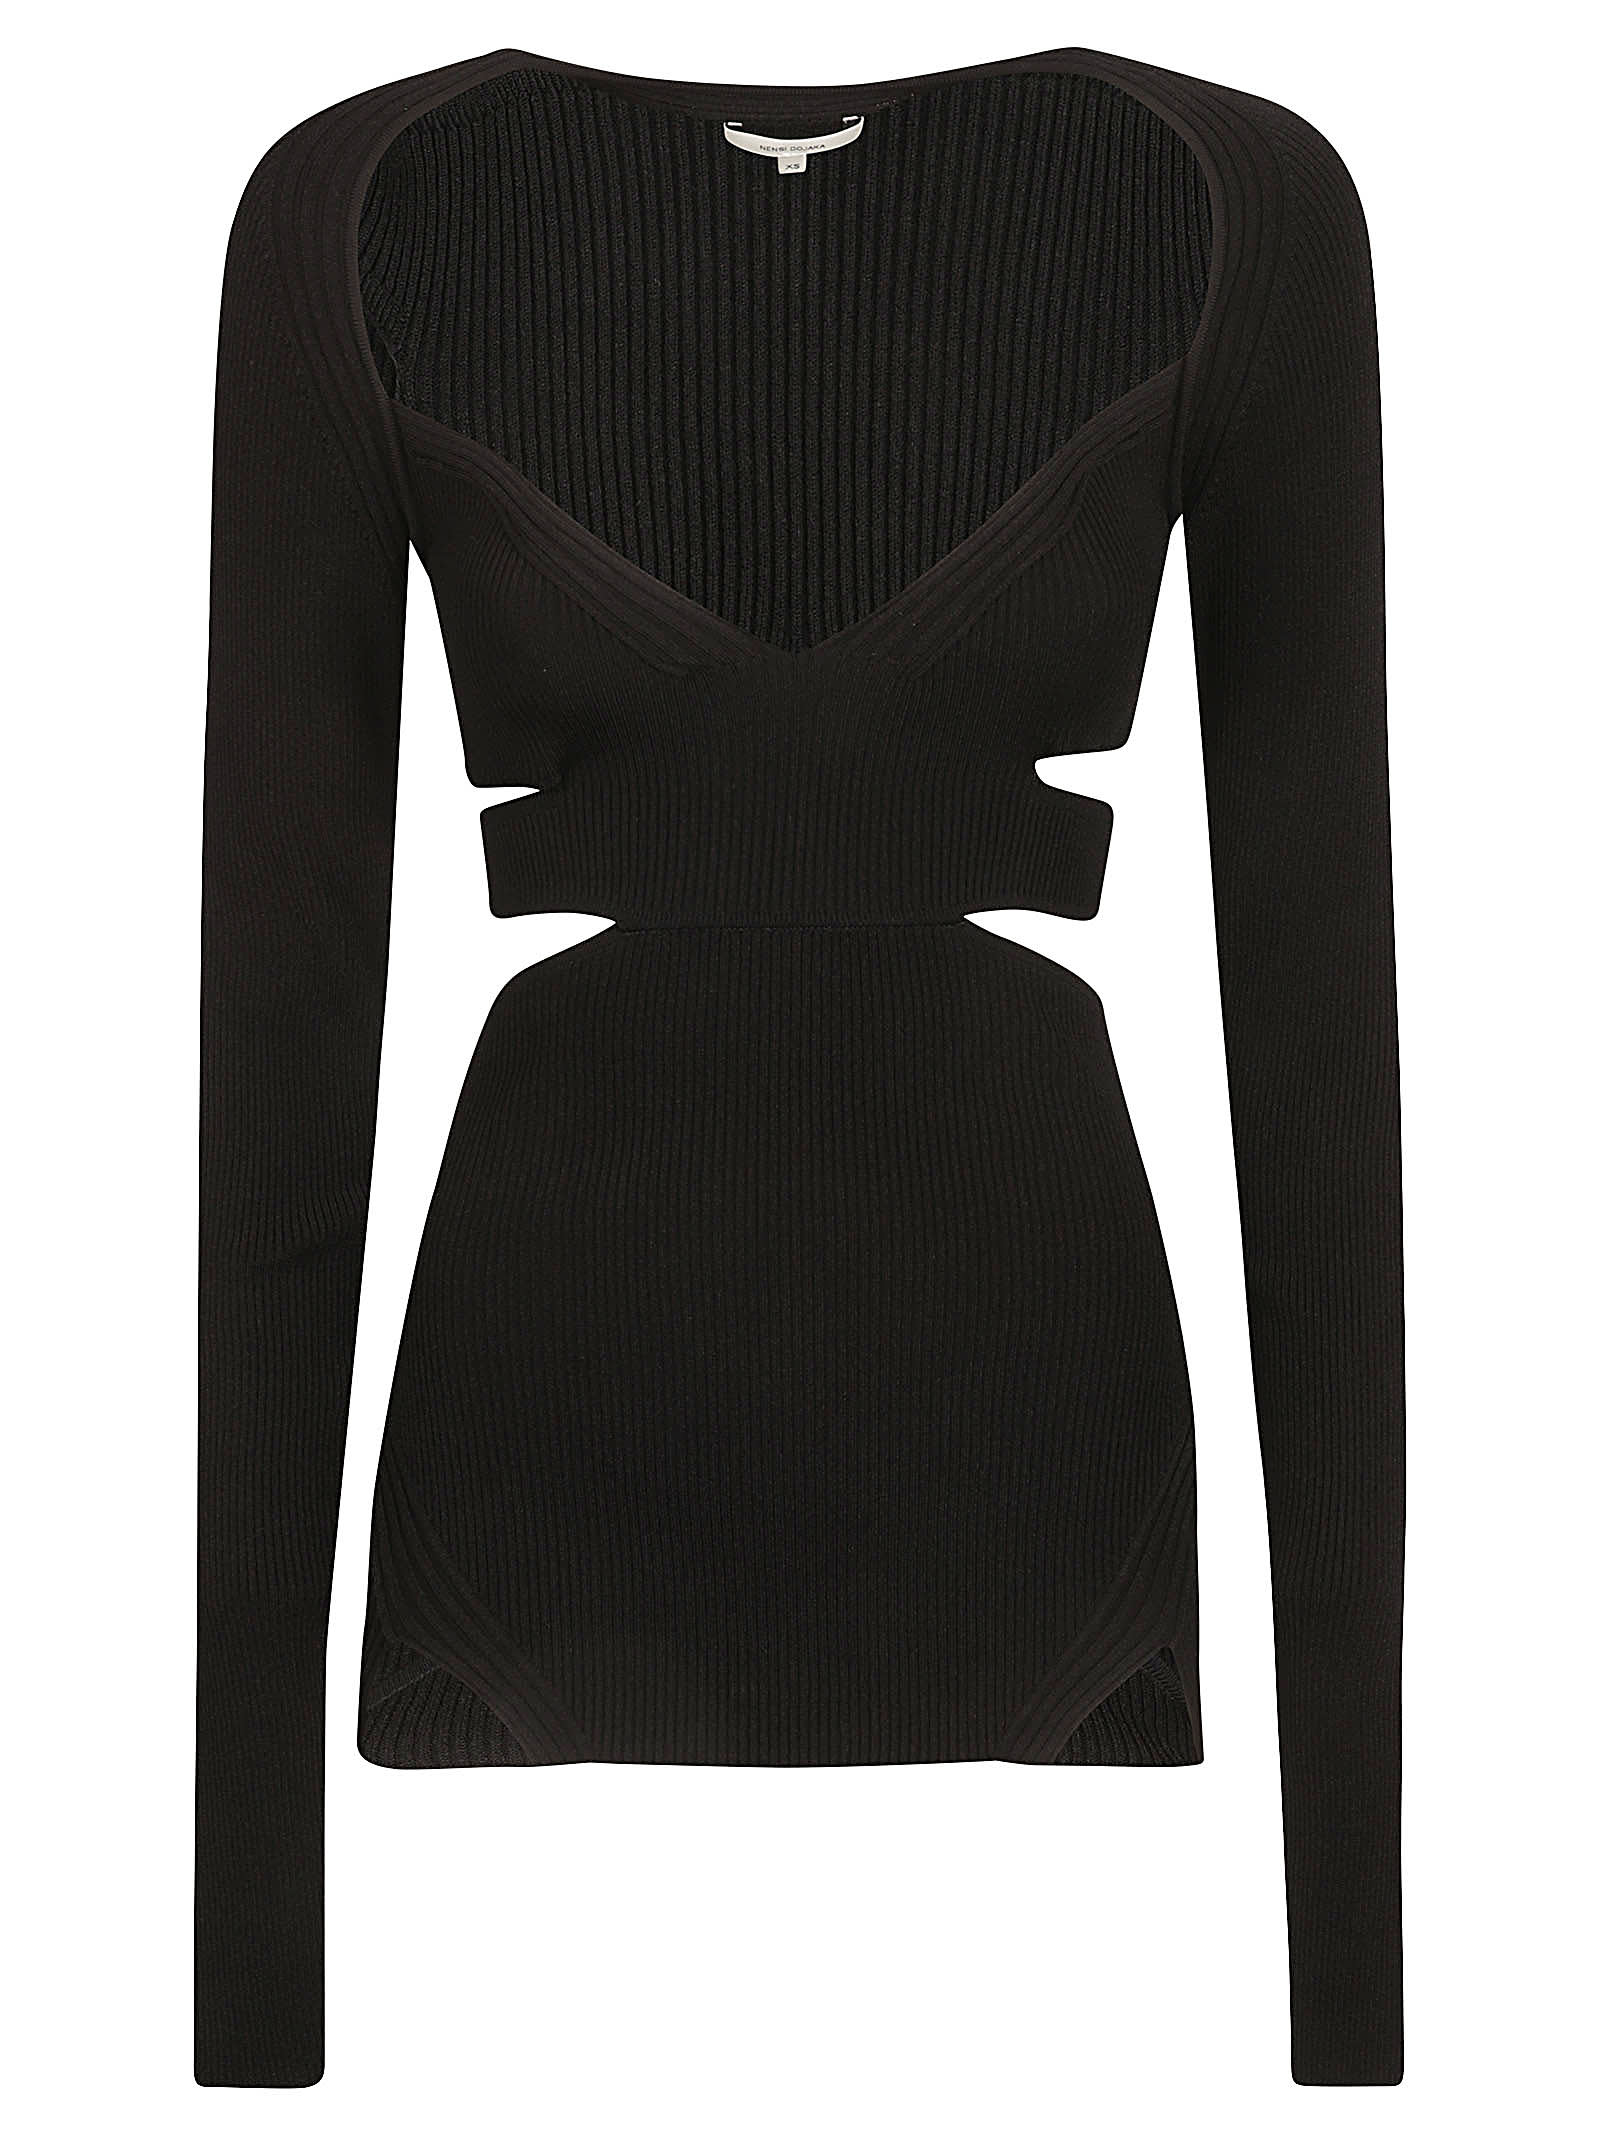 Cut-out Detail Longsleeved Knit Top